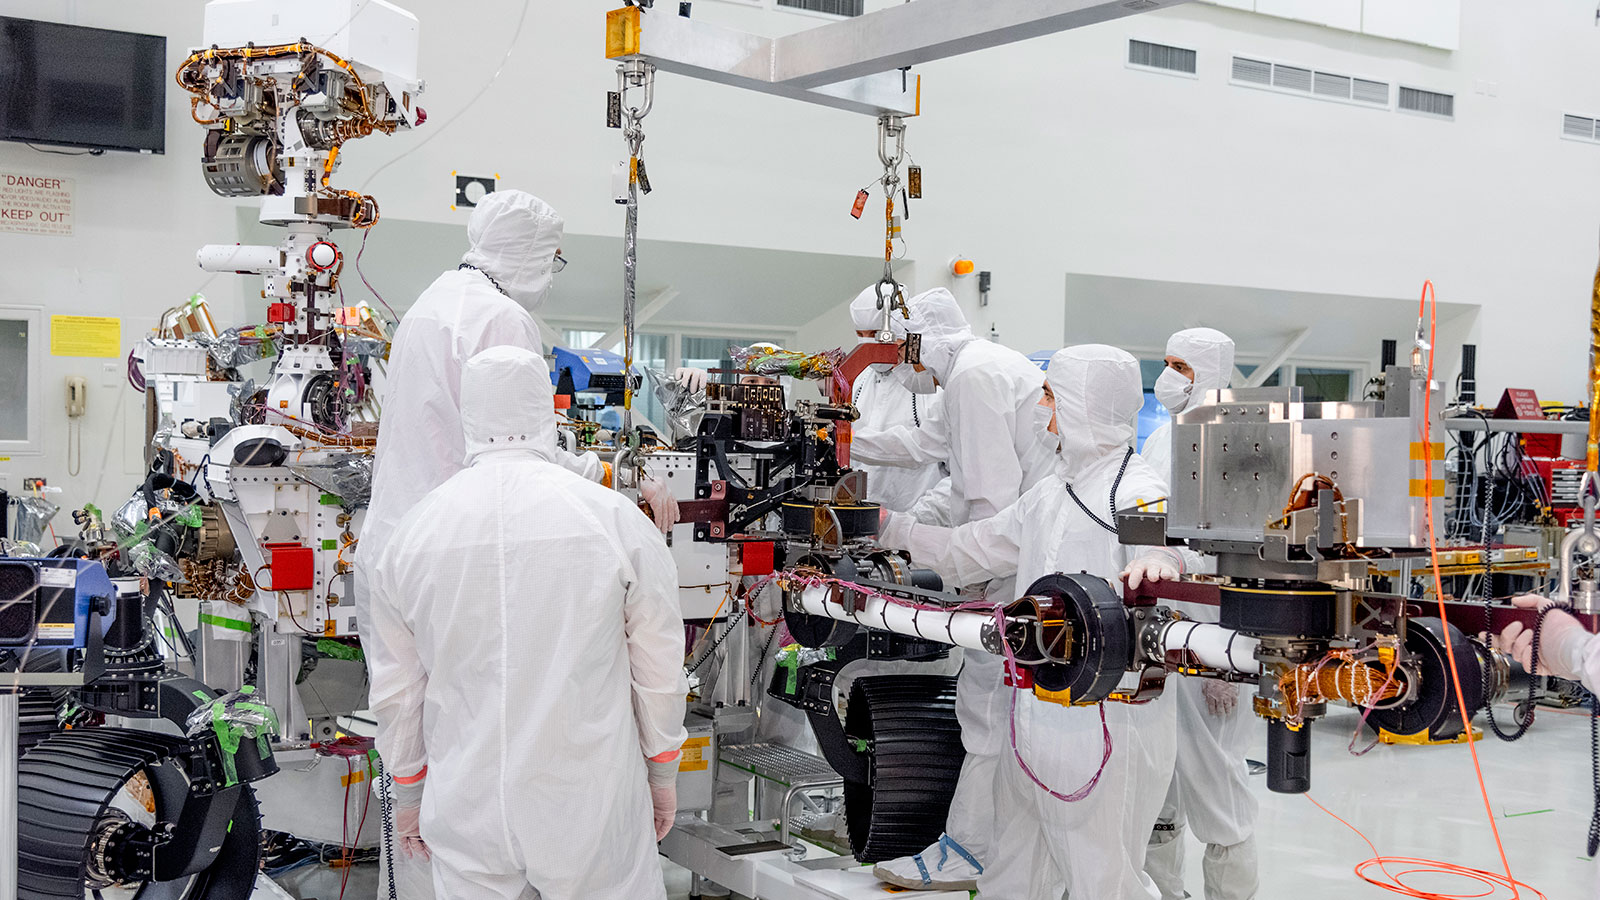 On June 21, 2019, engineers at NASA's Jet Propulsion Laboratory install the main robotic arm on the Mars 2020 rover